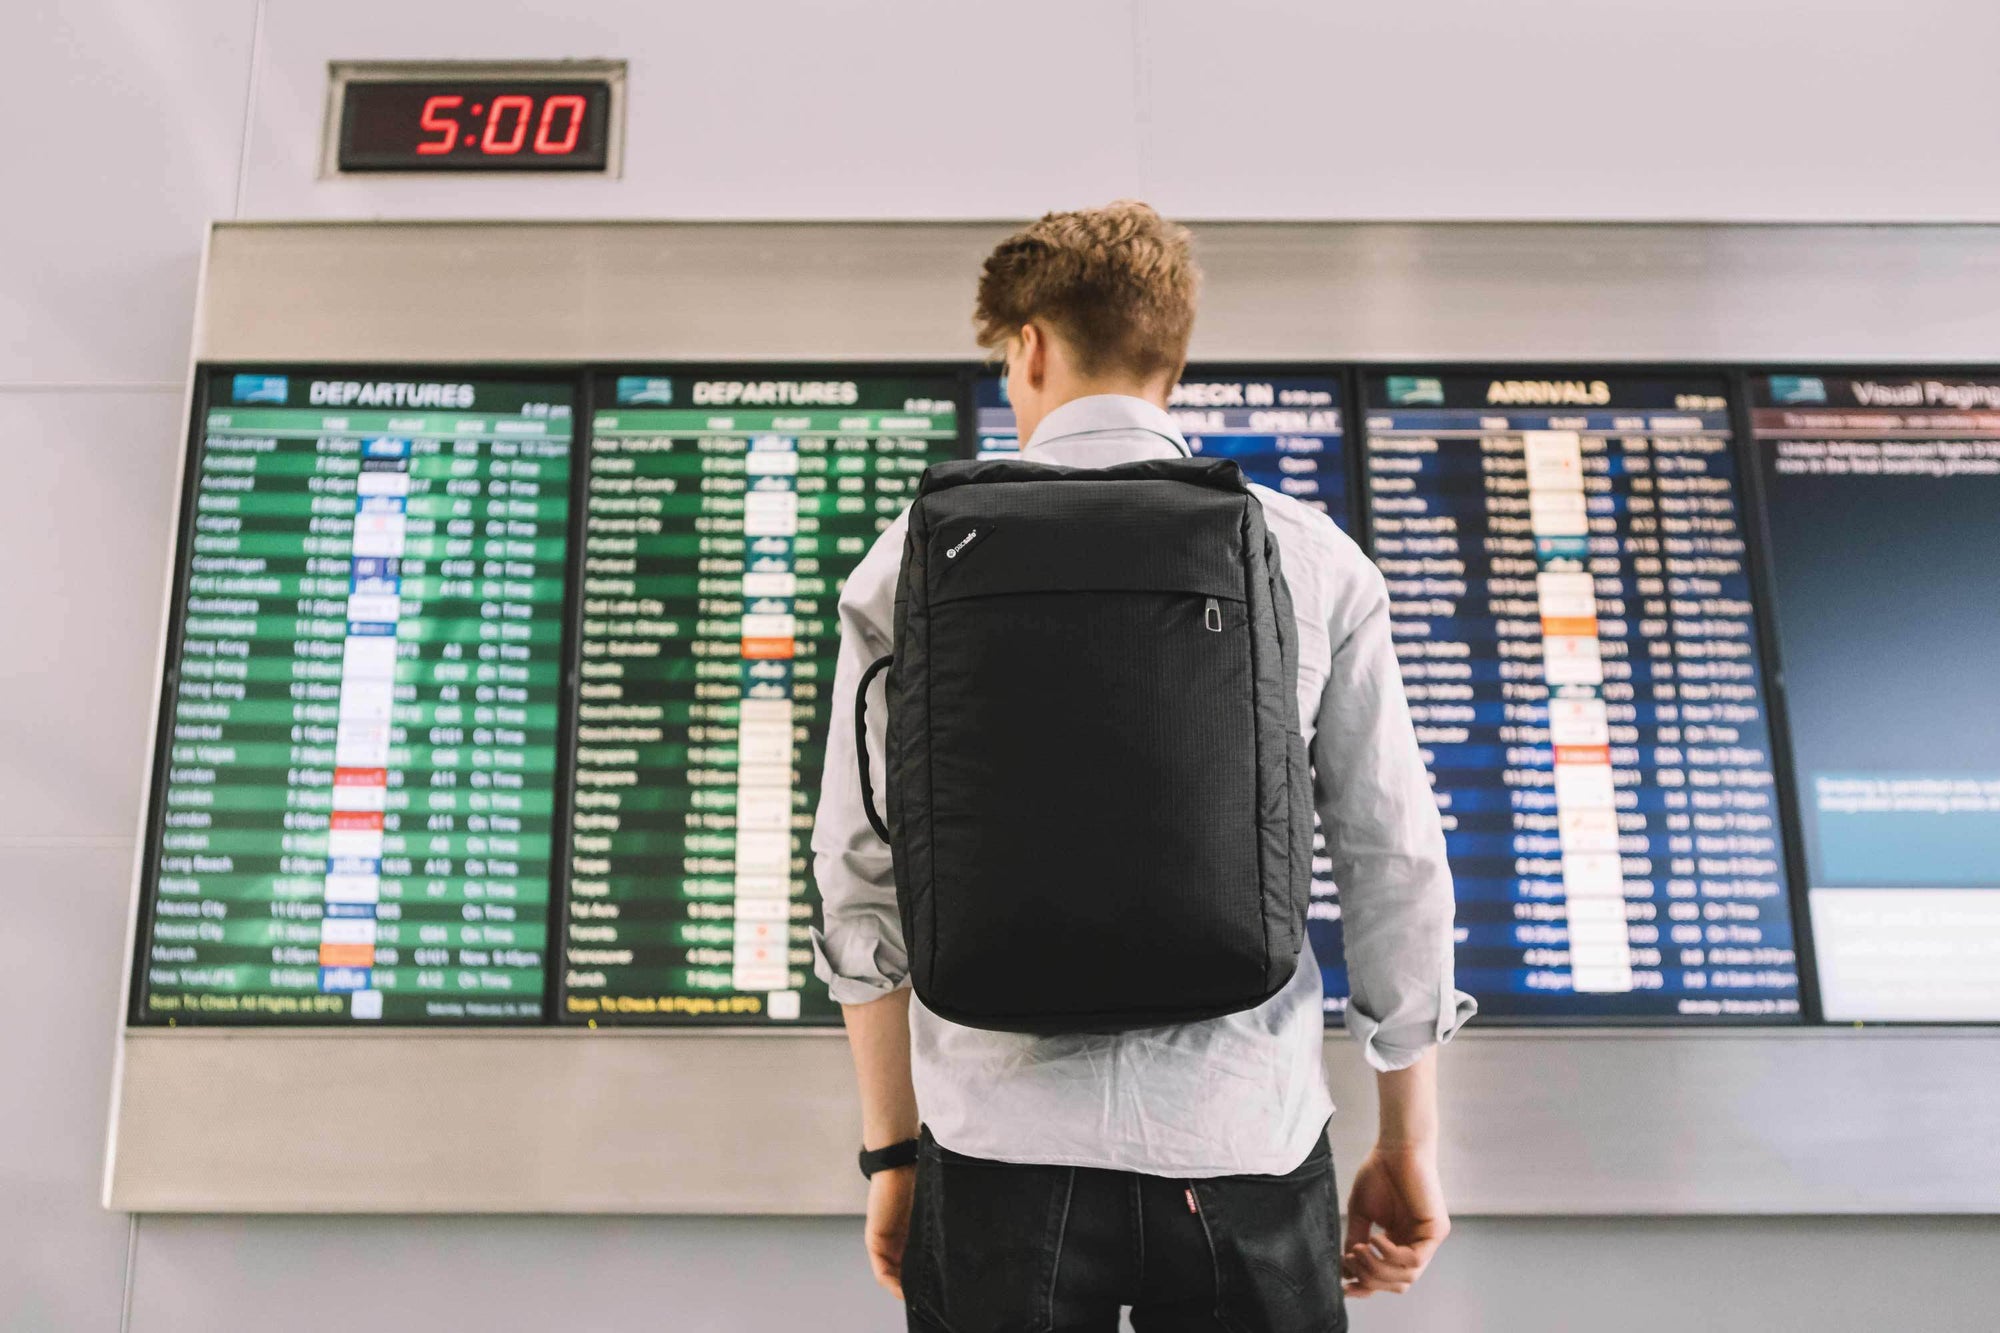 How To Get Through Airport Security Faster